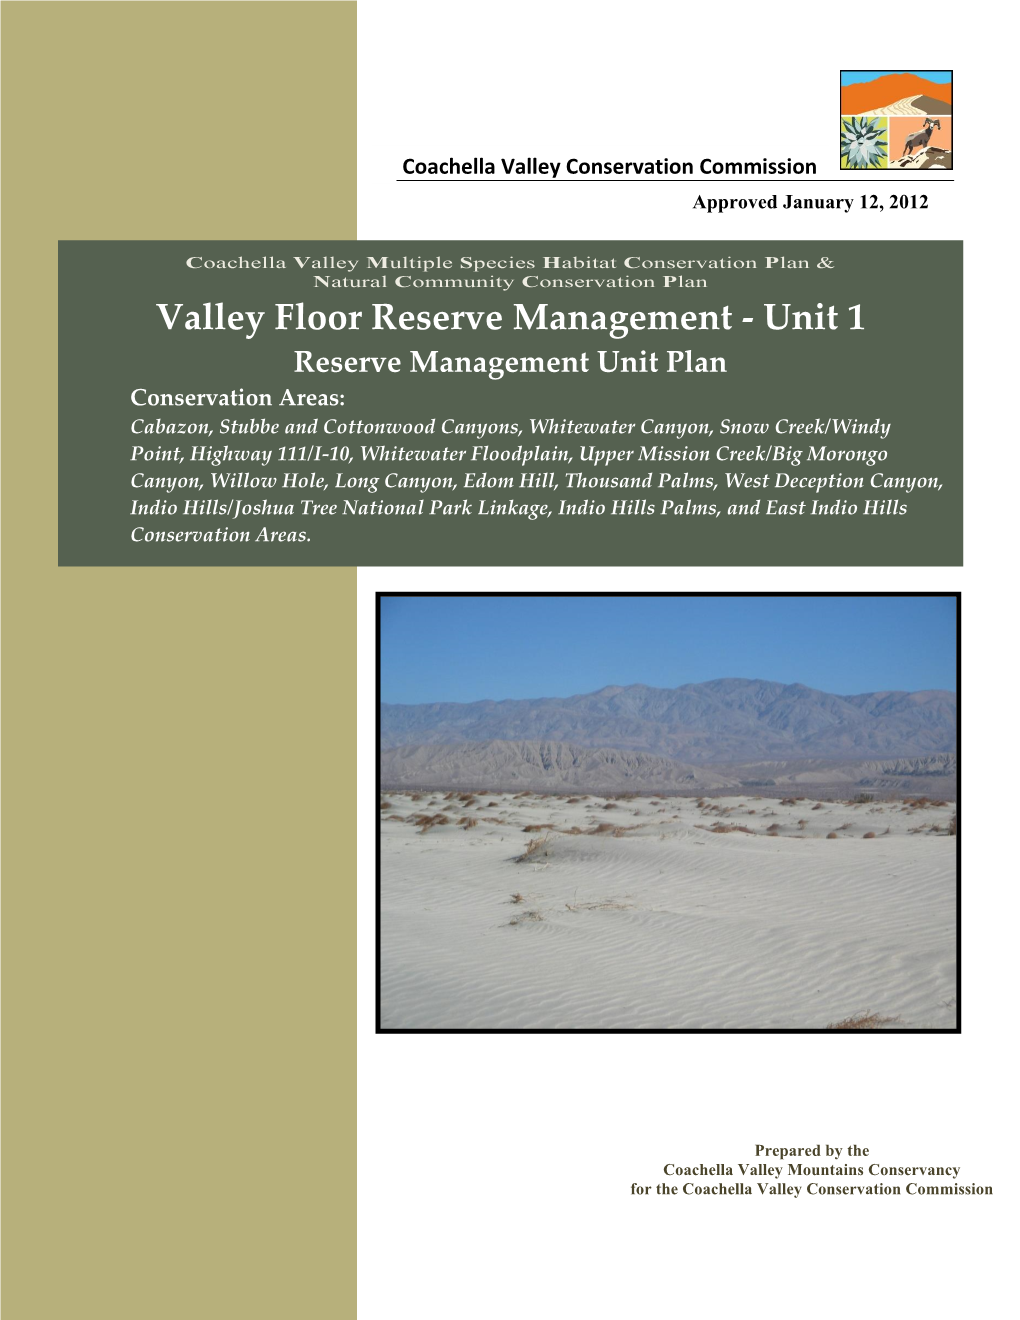 Valley Floor RMUP Will Be Determined Over Time As Lands Are Acquired and Partnership Opportunities Become Available